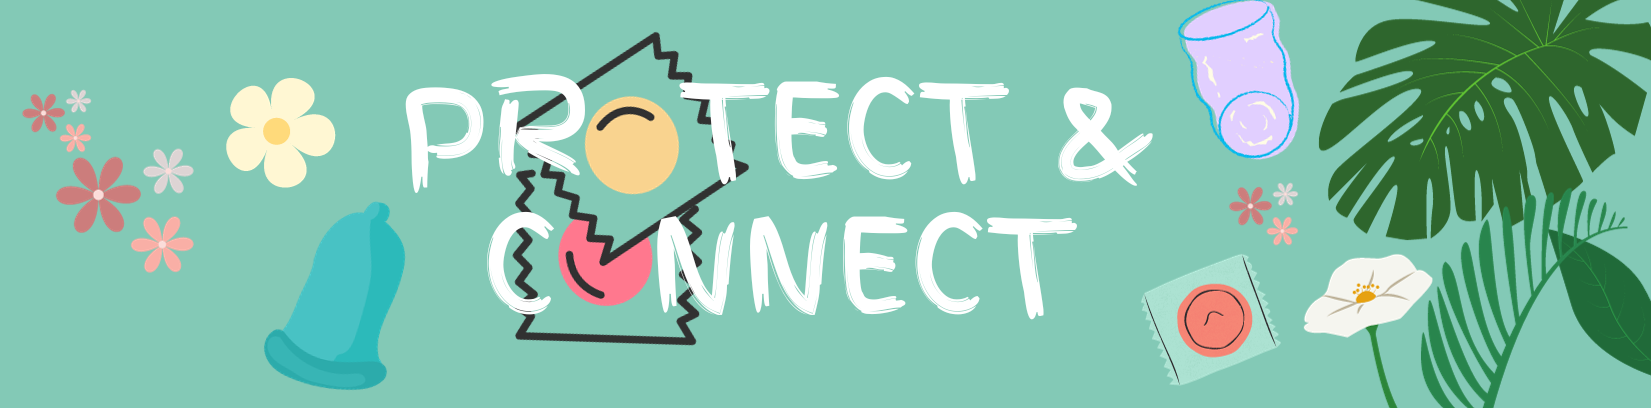 protect & connect banner